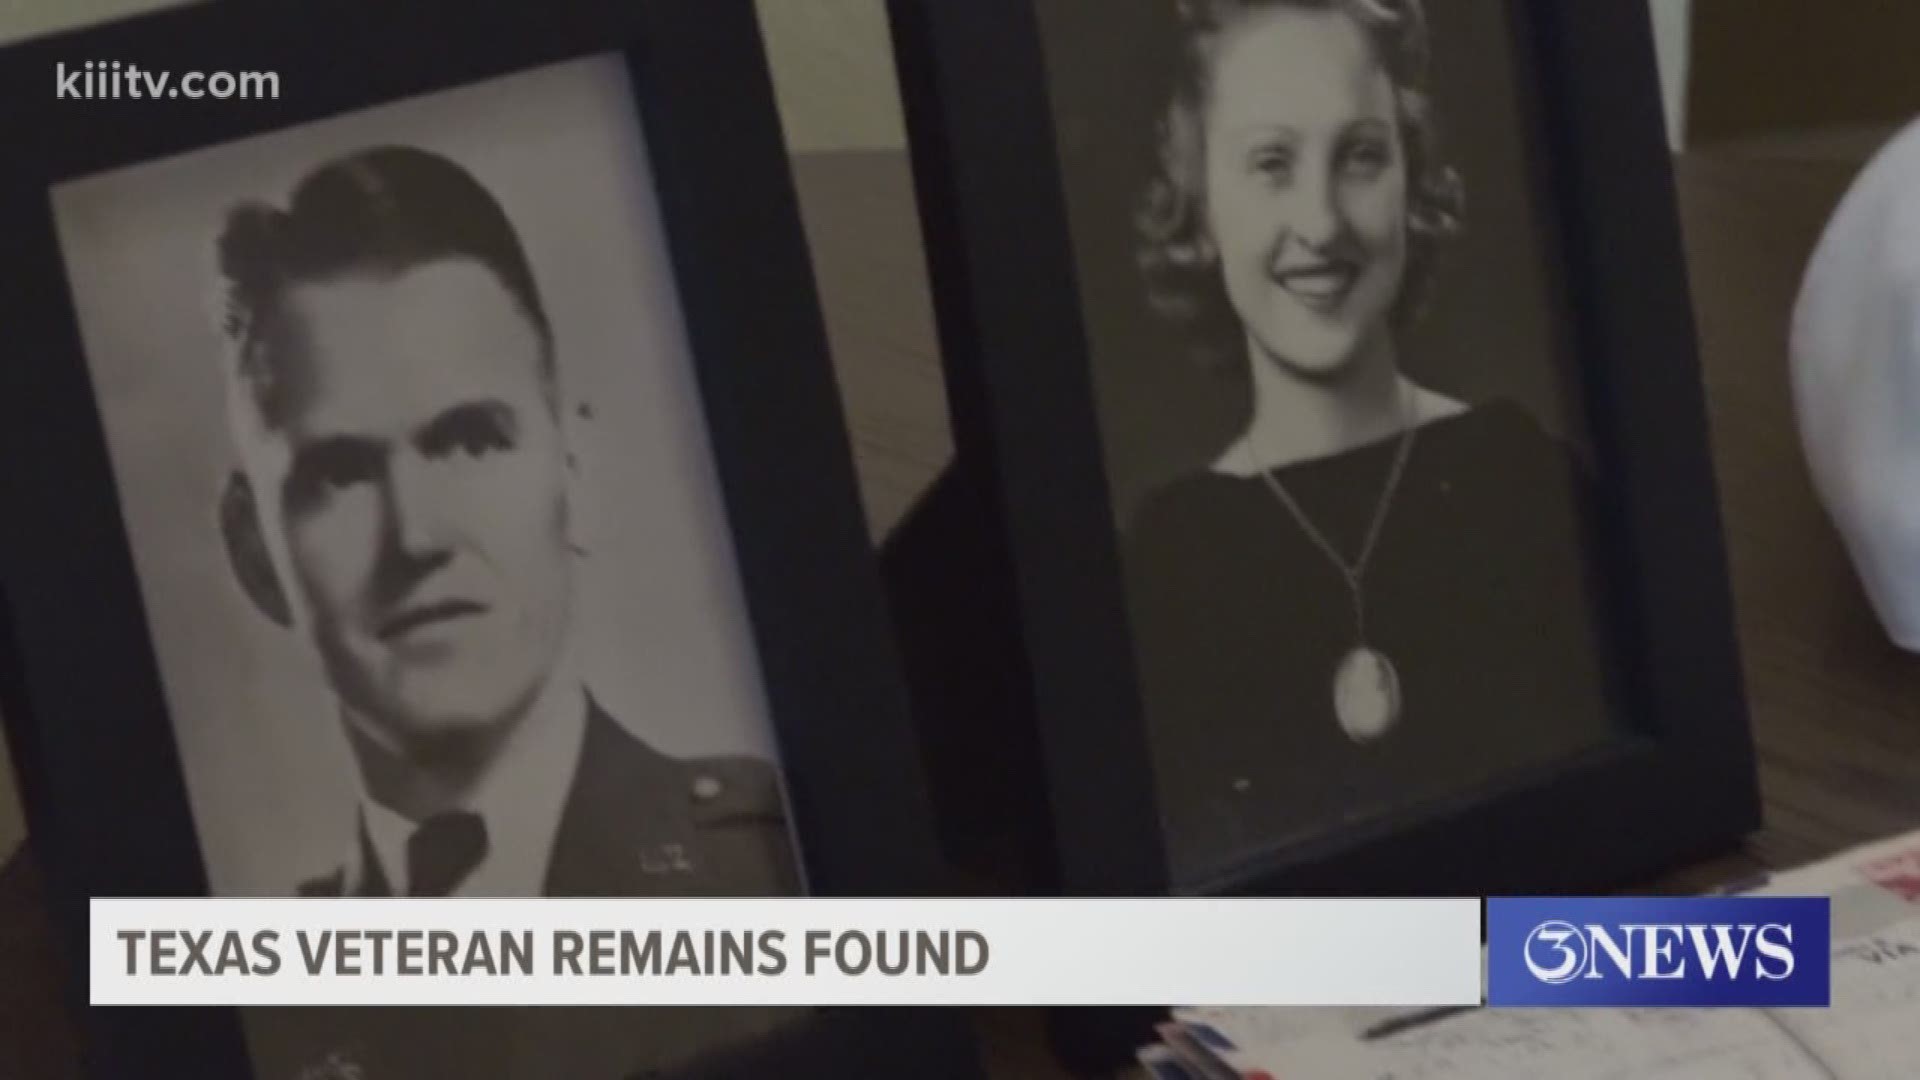 Almost 70 years later, the mystery of a Texas veteran in North Korea has been solved.